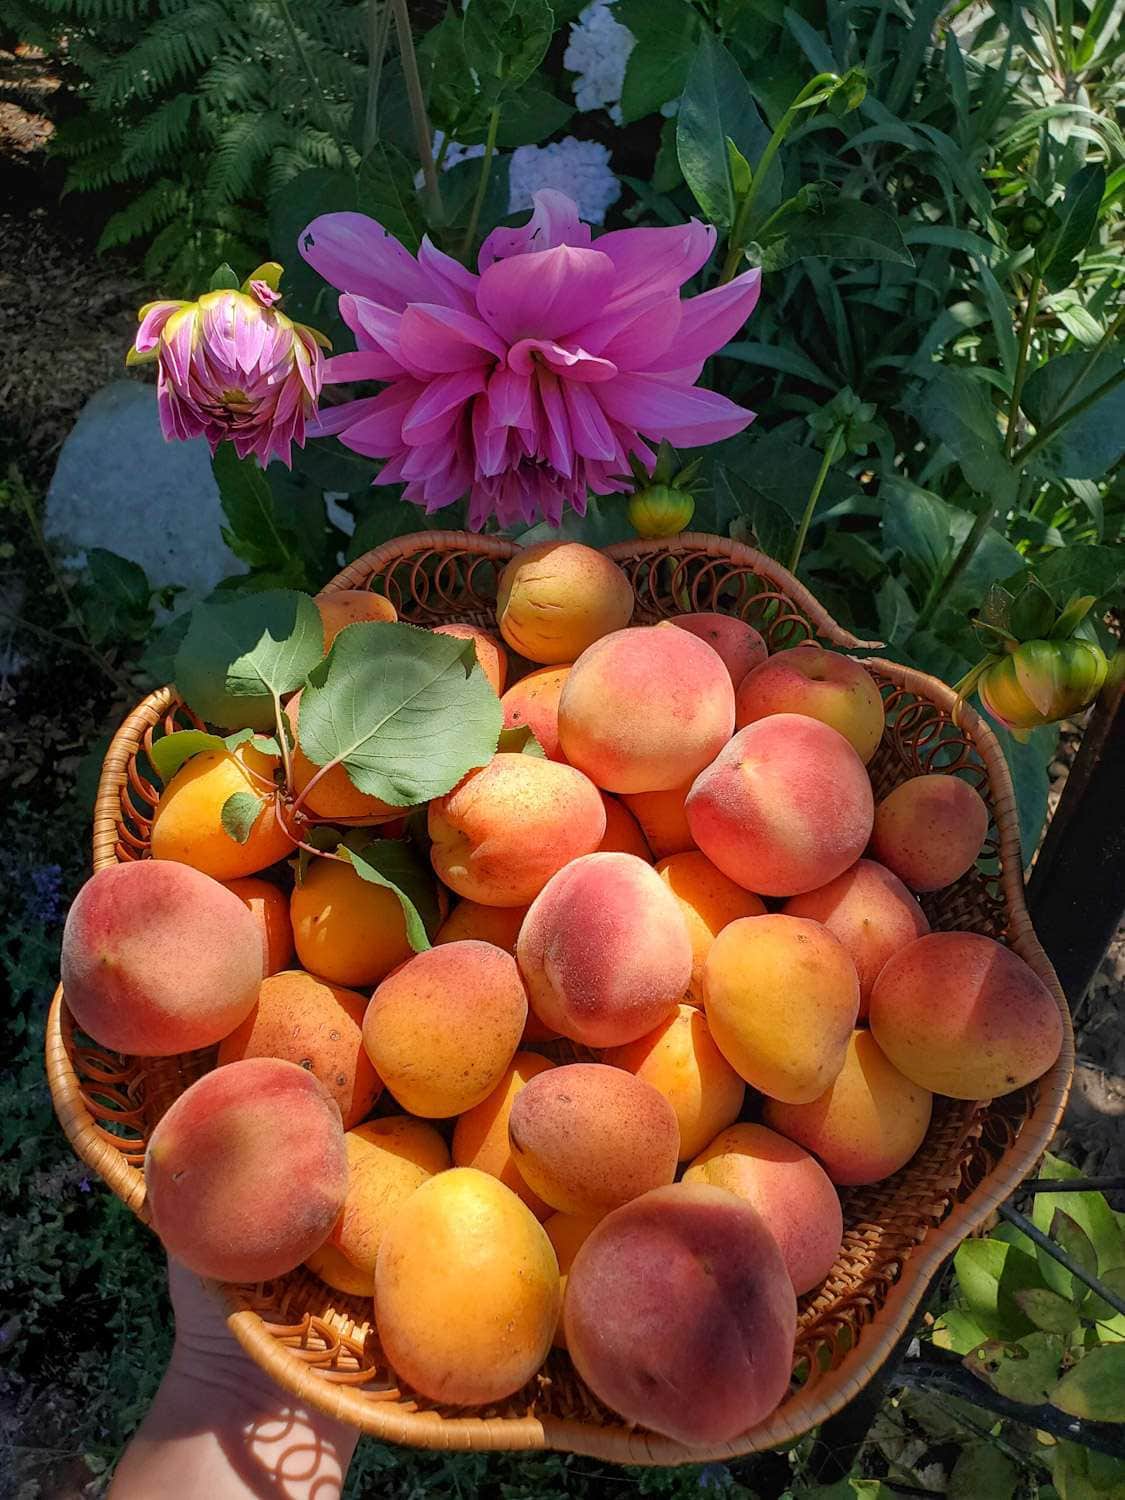 A wicker basket is being held next to a dahlia plant with a few dark pink flowers, freshly harvested apricots and peaches are inside the basket.  